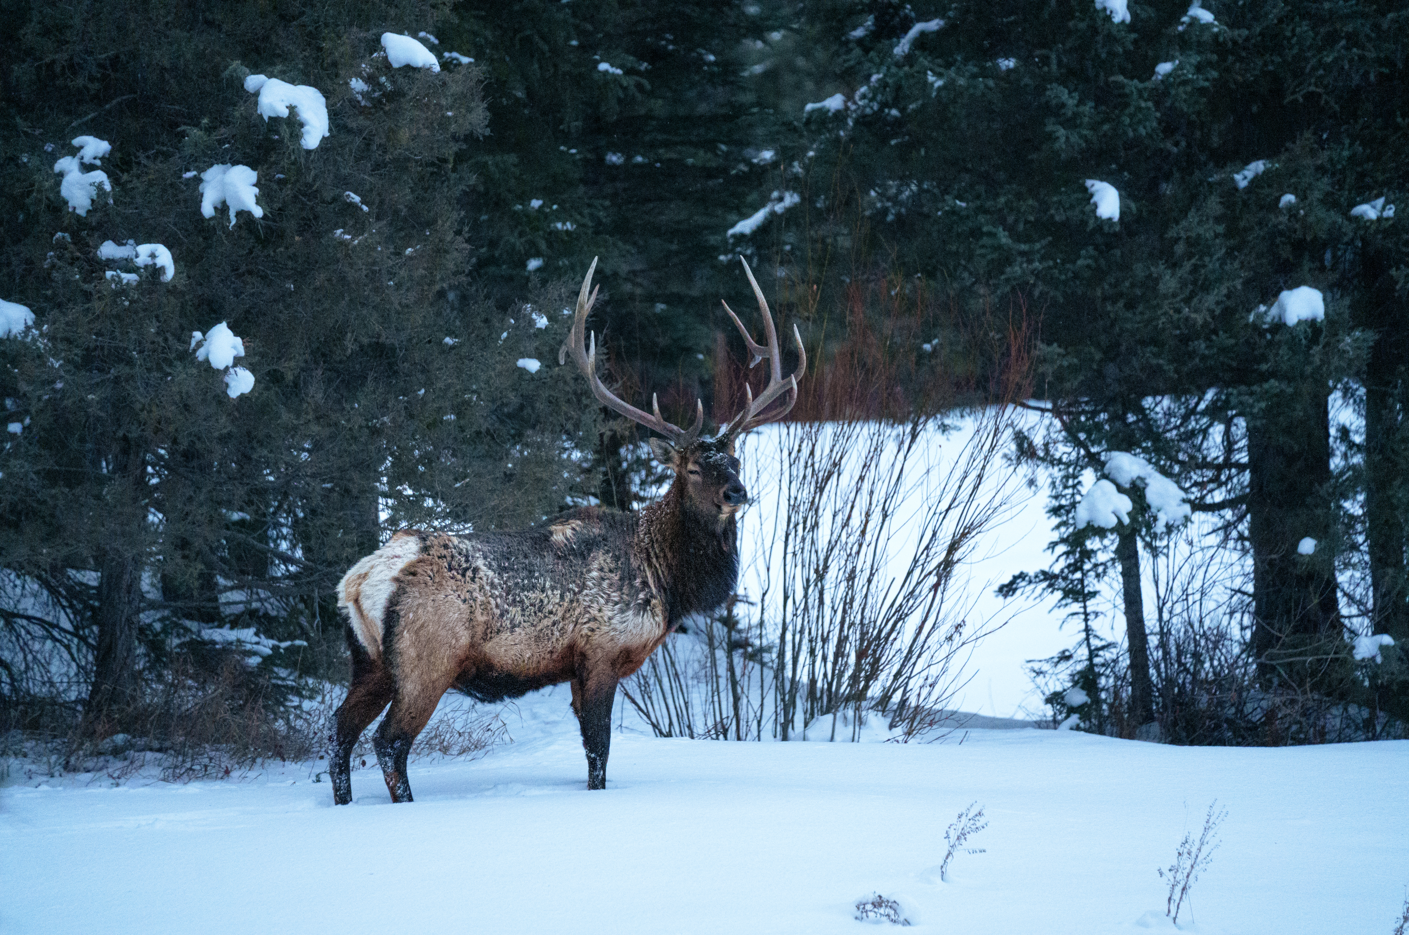 A large elk is standing in the snow in the woods.